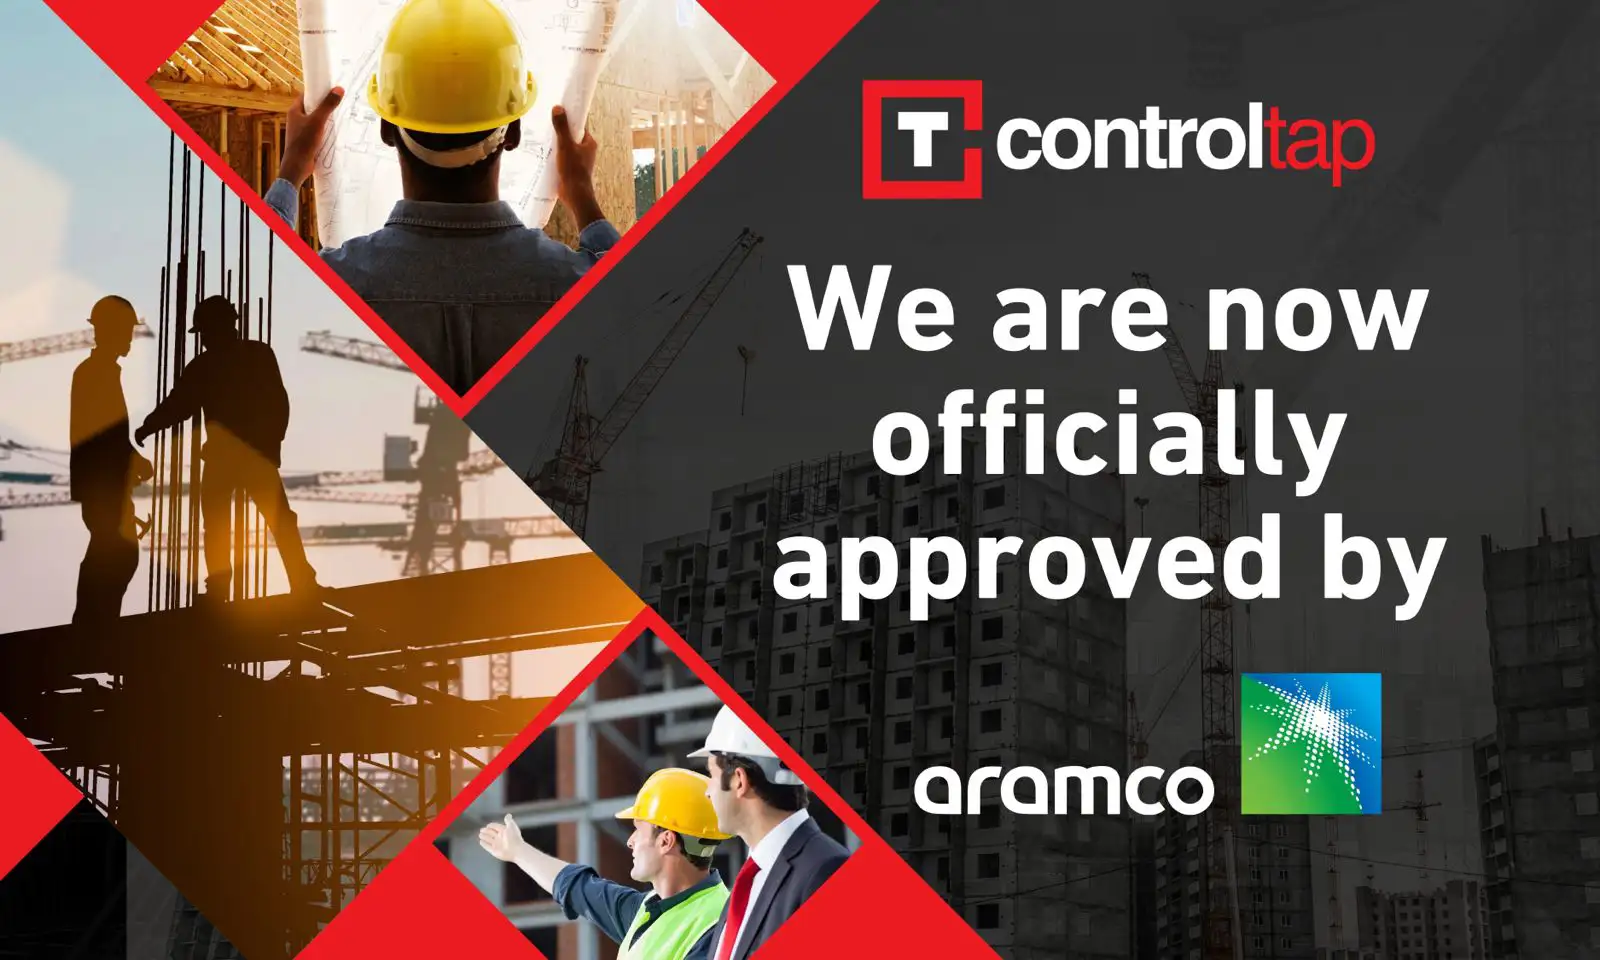 Controltap We are now officially approved by Aramco